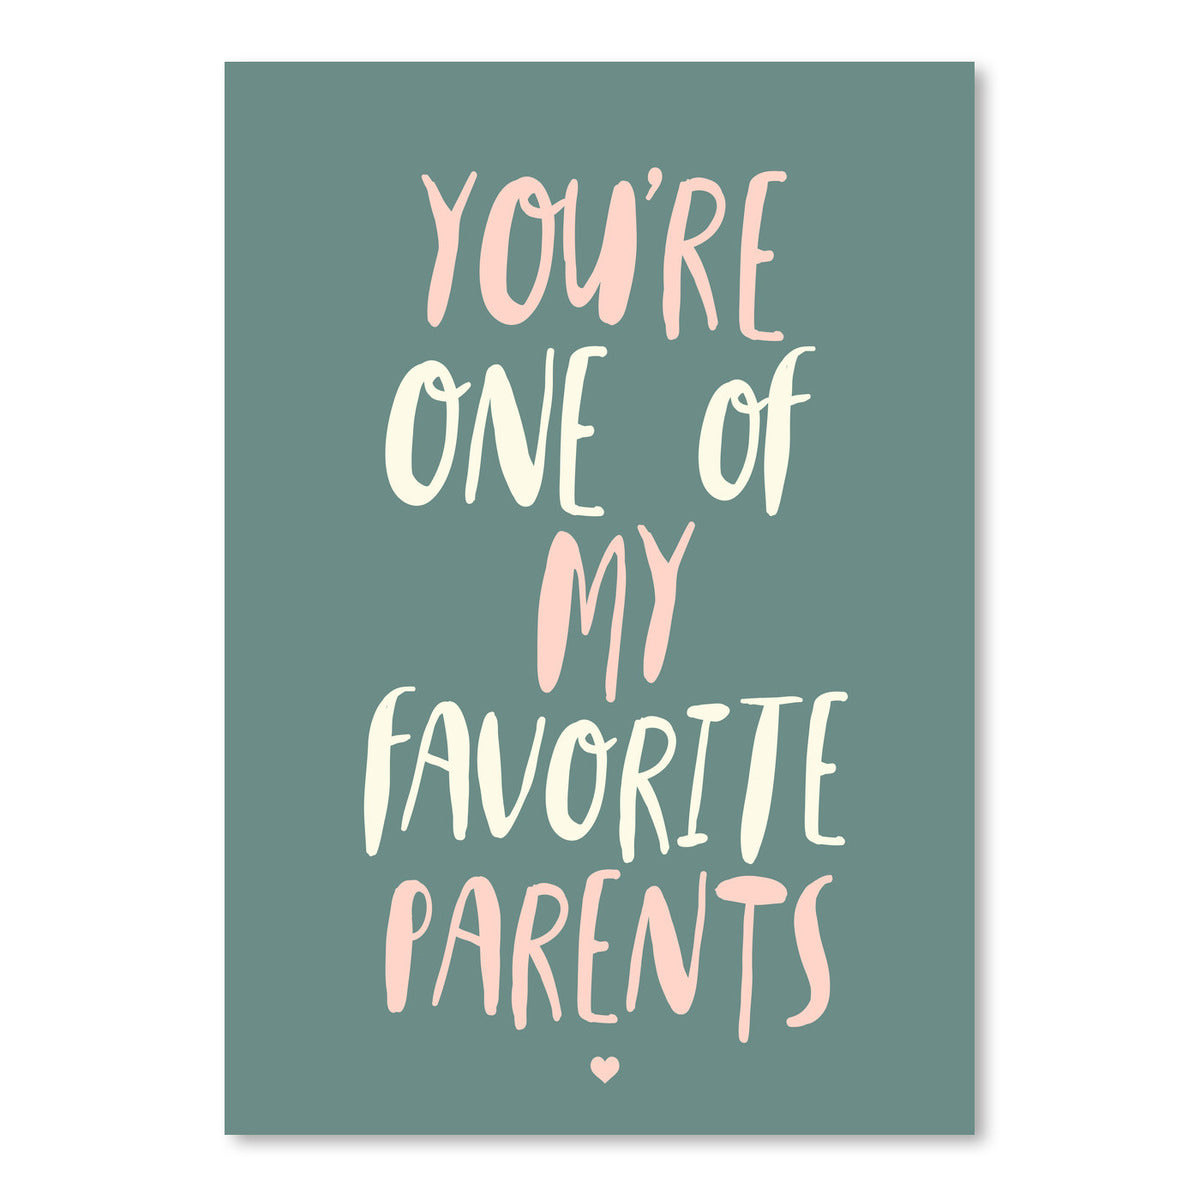 YouRe One Of My Favorite Parents by Motivated Type - Art Print - Americanflat